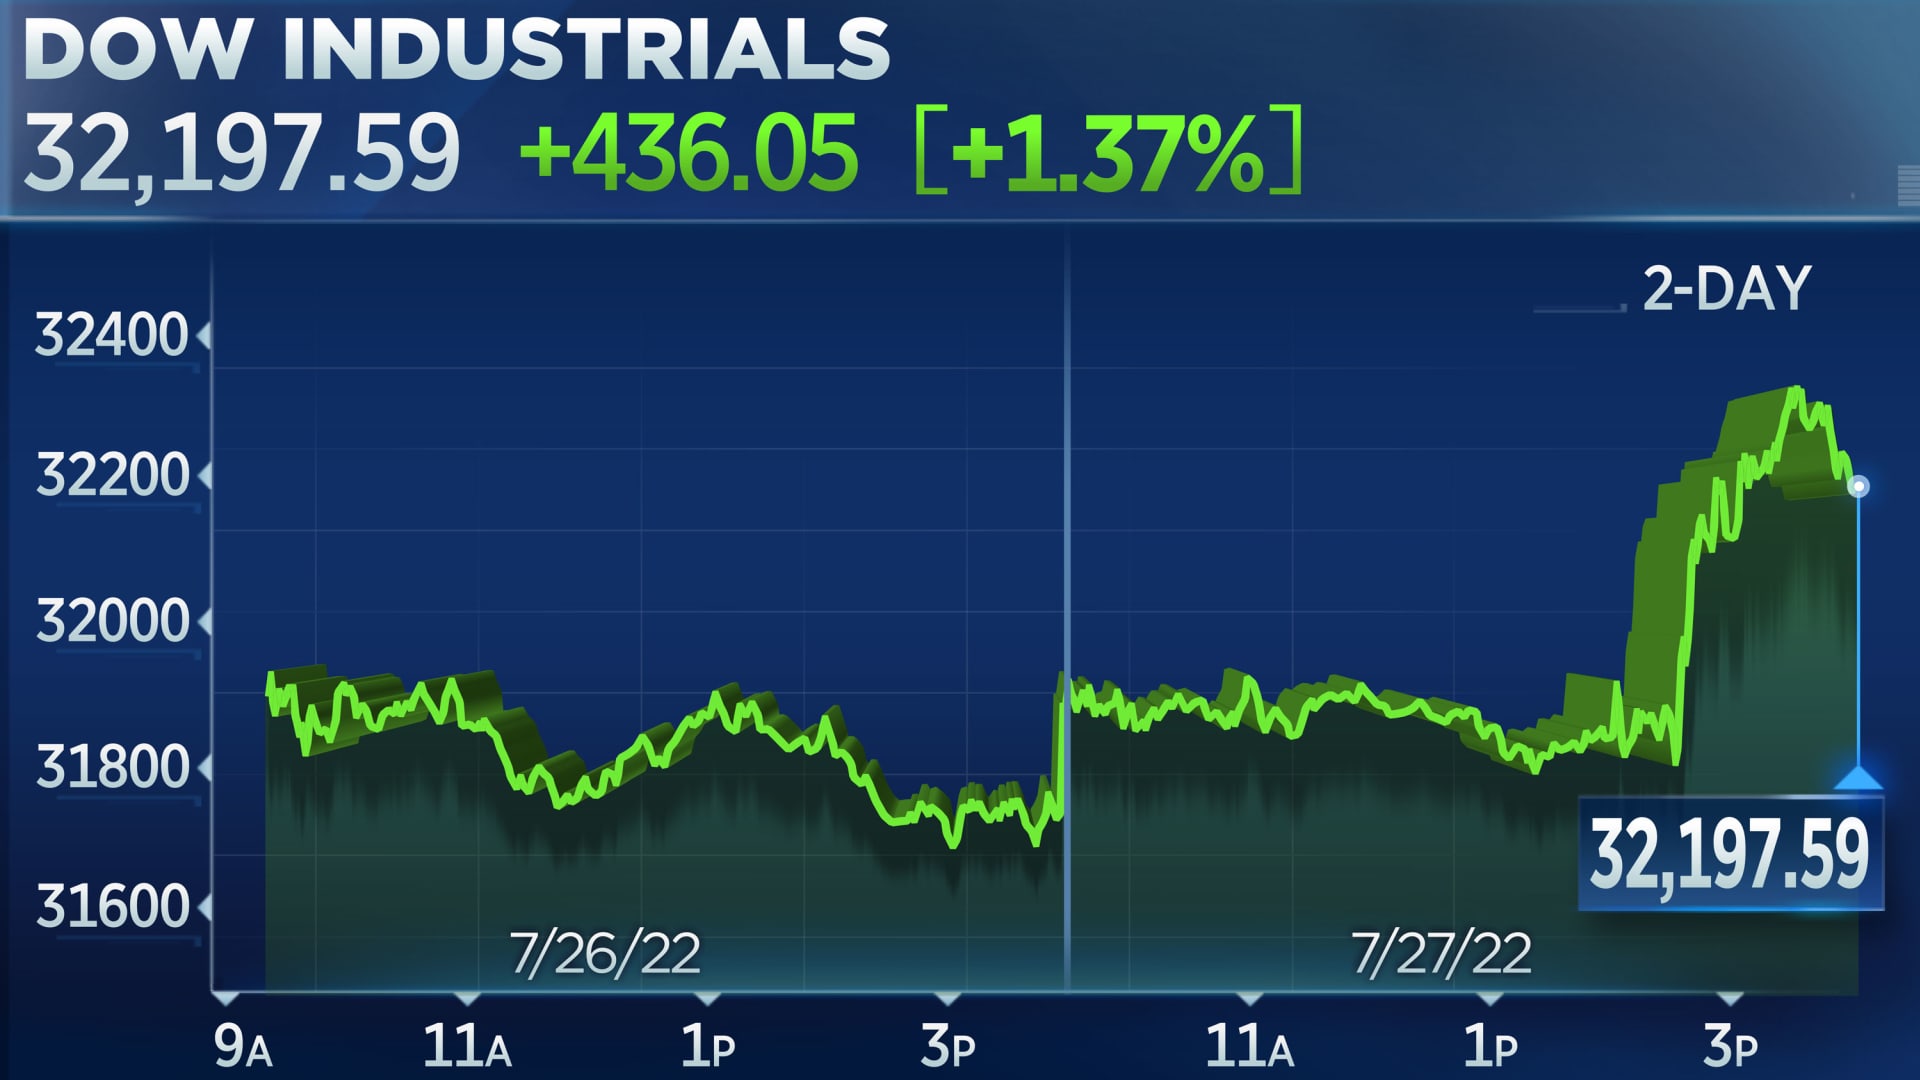 Dow rallies 400 points as Powell hints Fed could slow pace of rate hikes, Nasdaq jumps 4%